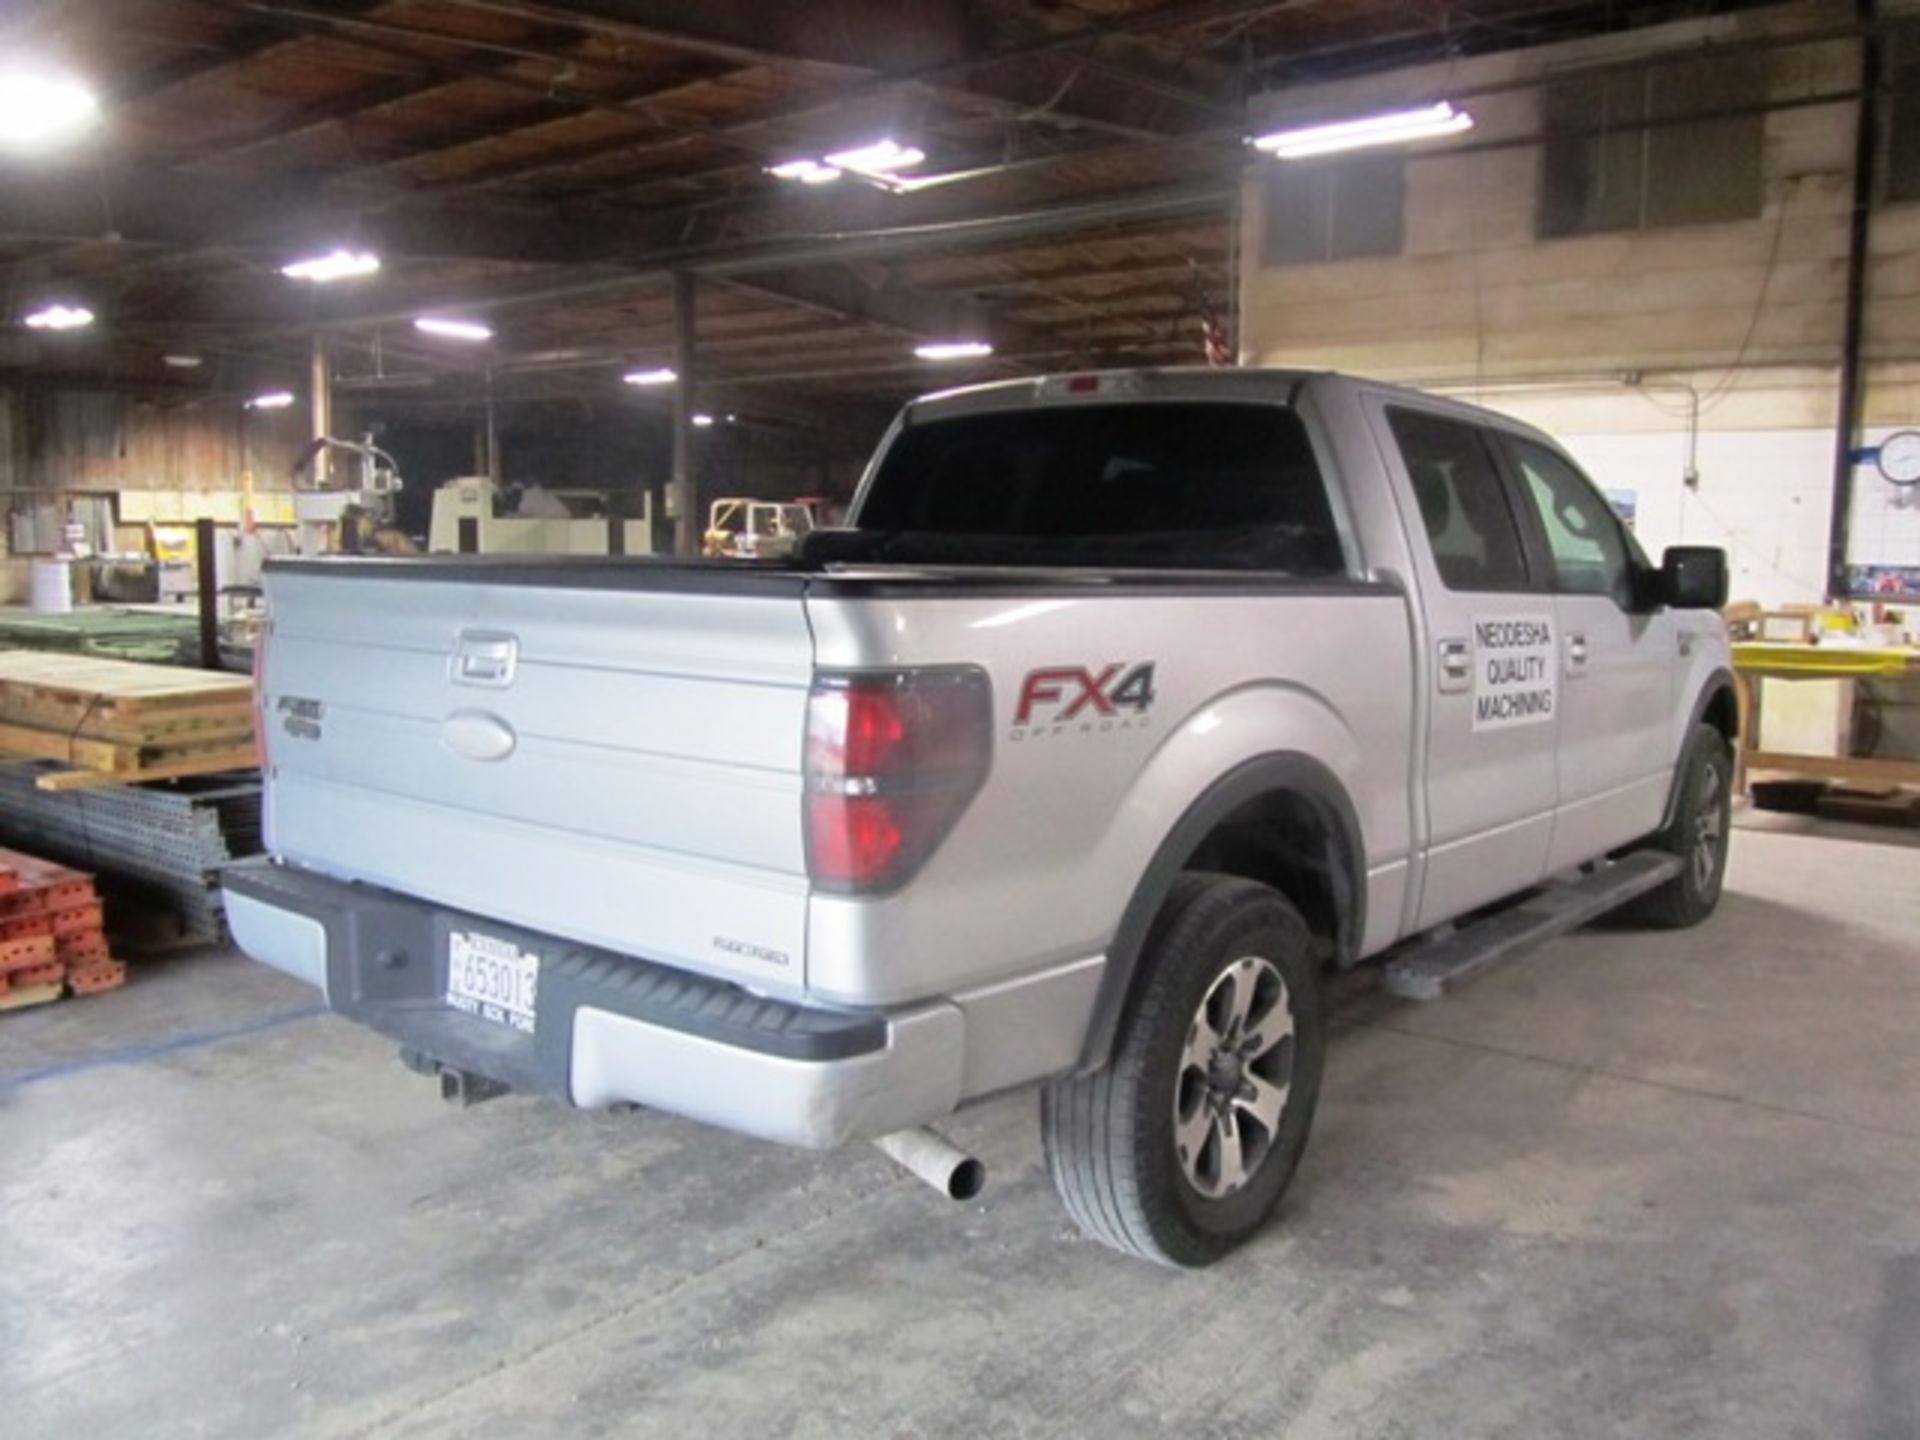 Ford F150 FX4 Crew Cab Pick-Up Truck with Short Bed, Running Boards, Automatic Transmission, 5.4 - Image 3 of 6